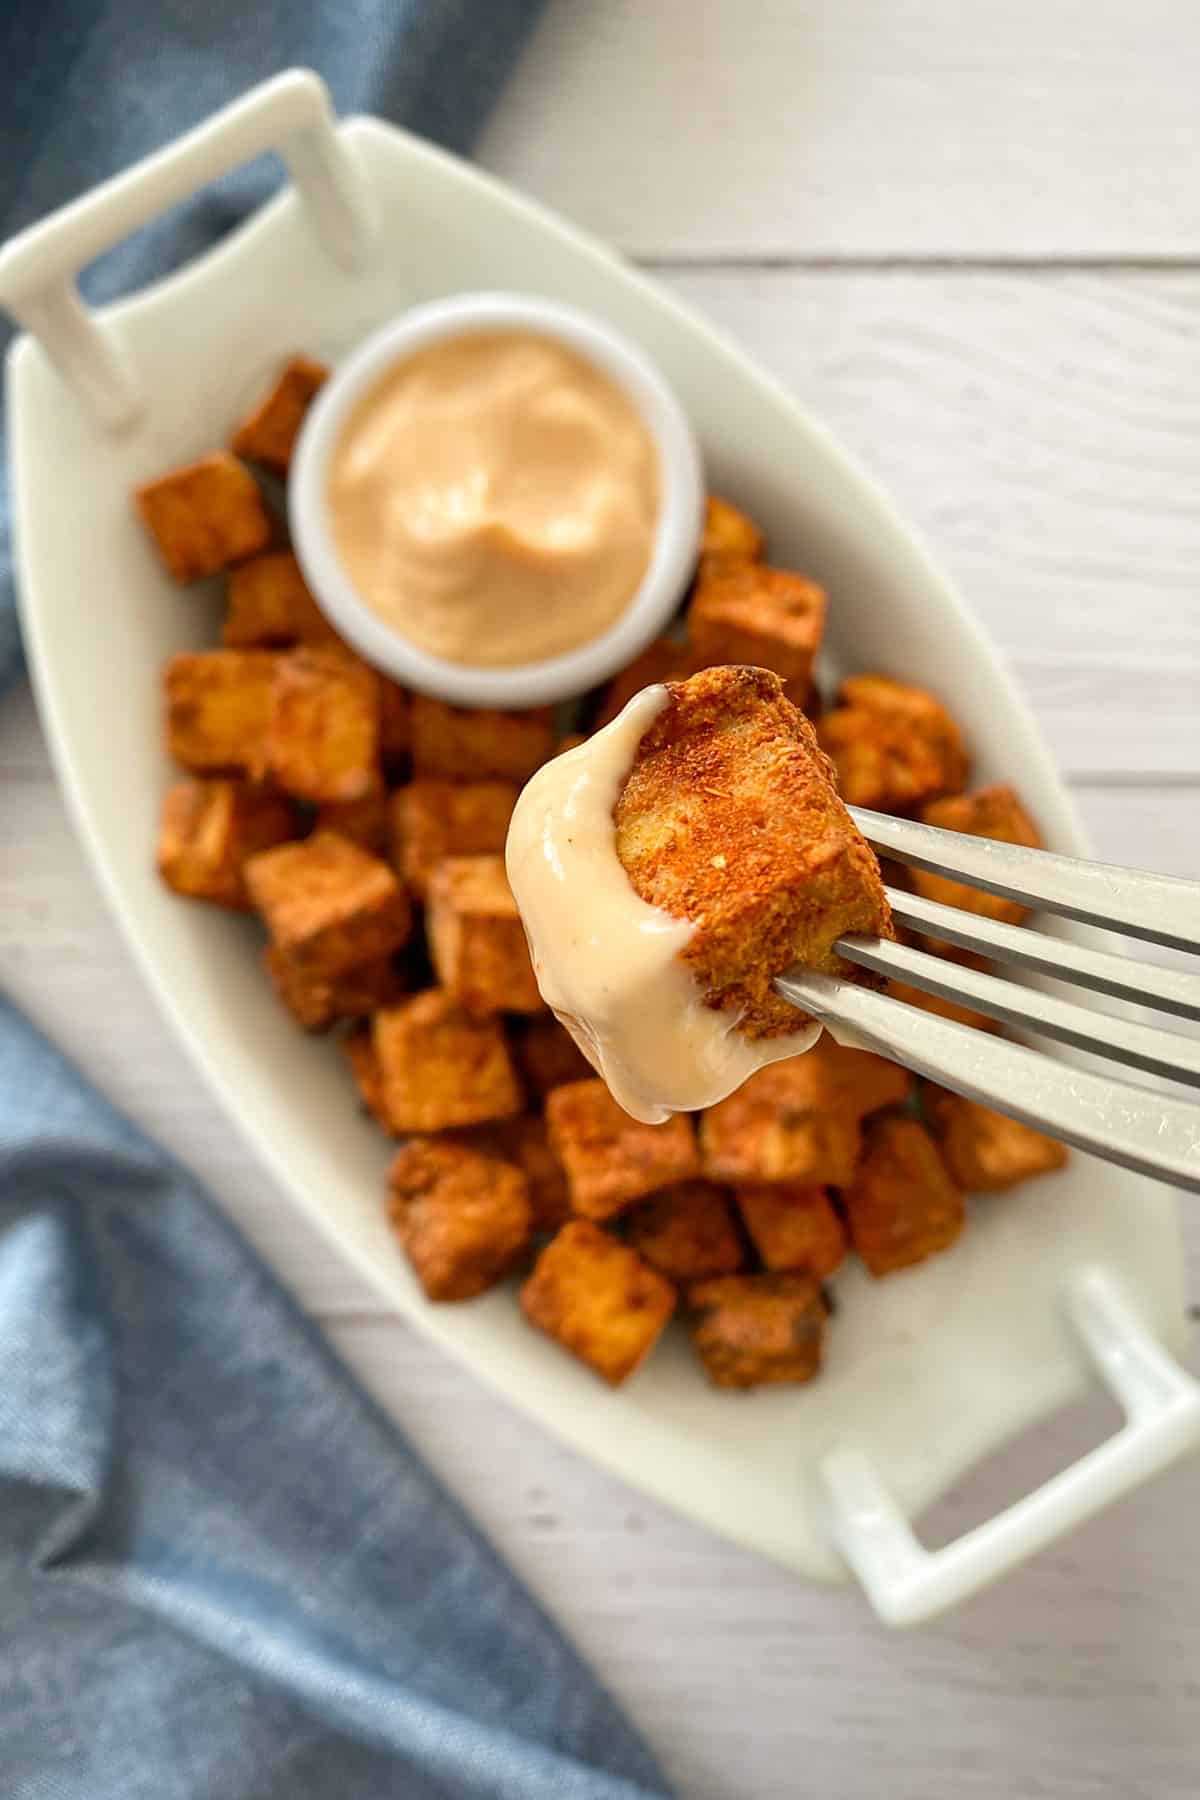 Fork with cubed tofu on it that has been dunked into a pink dip.